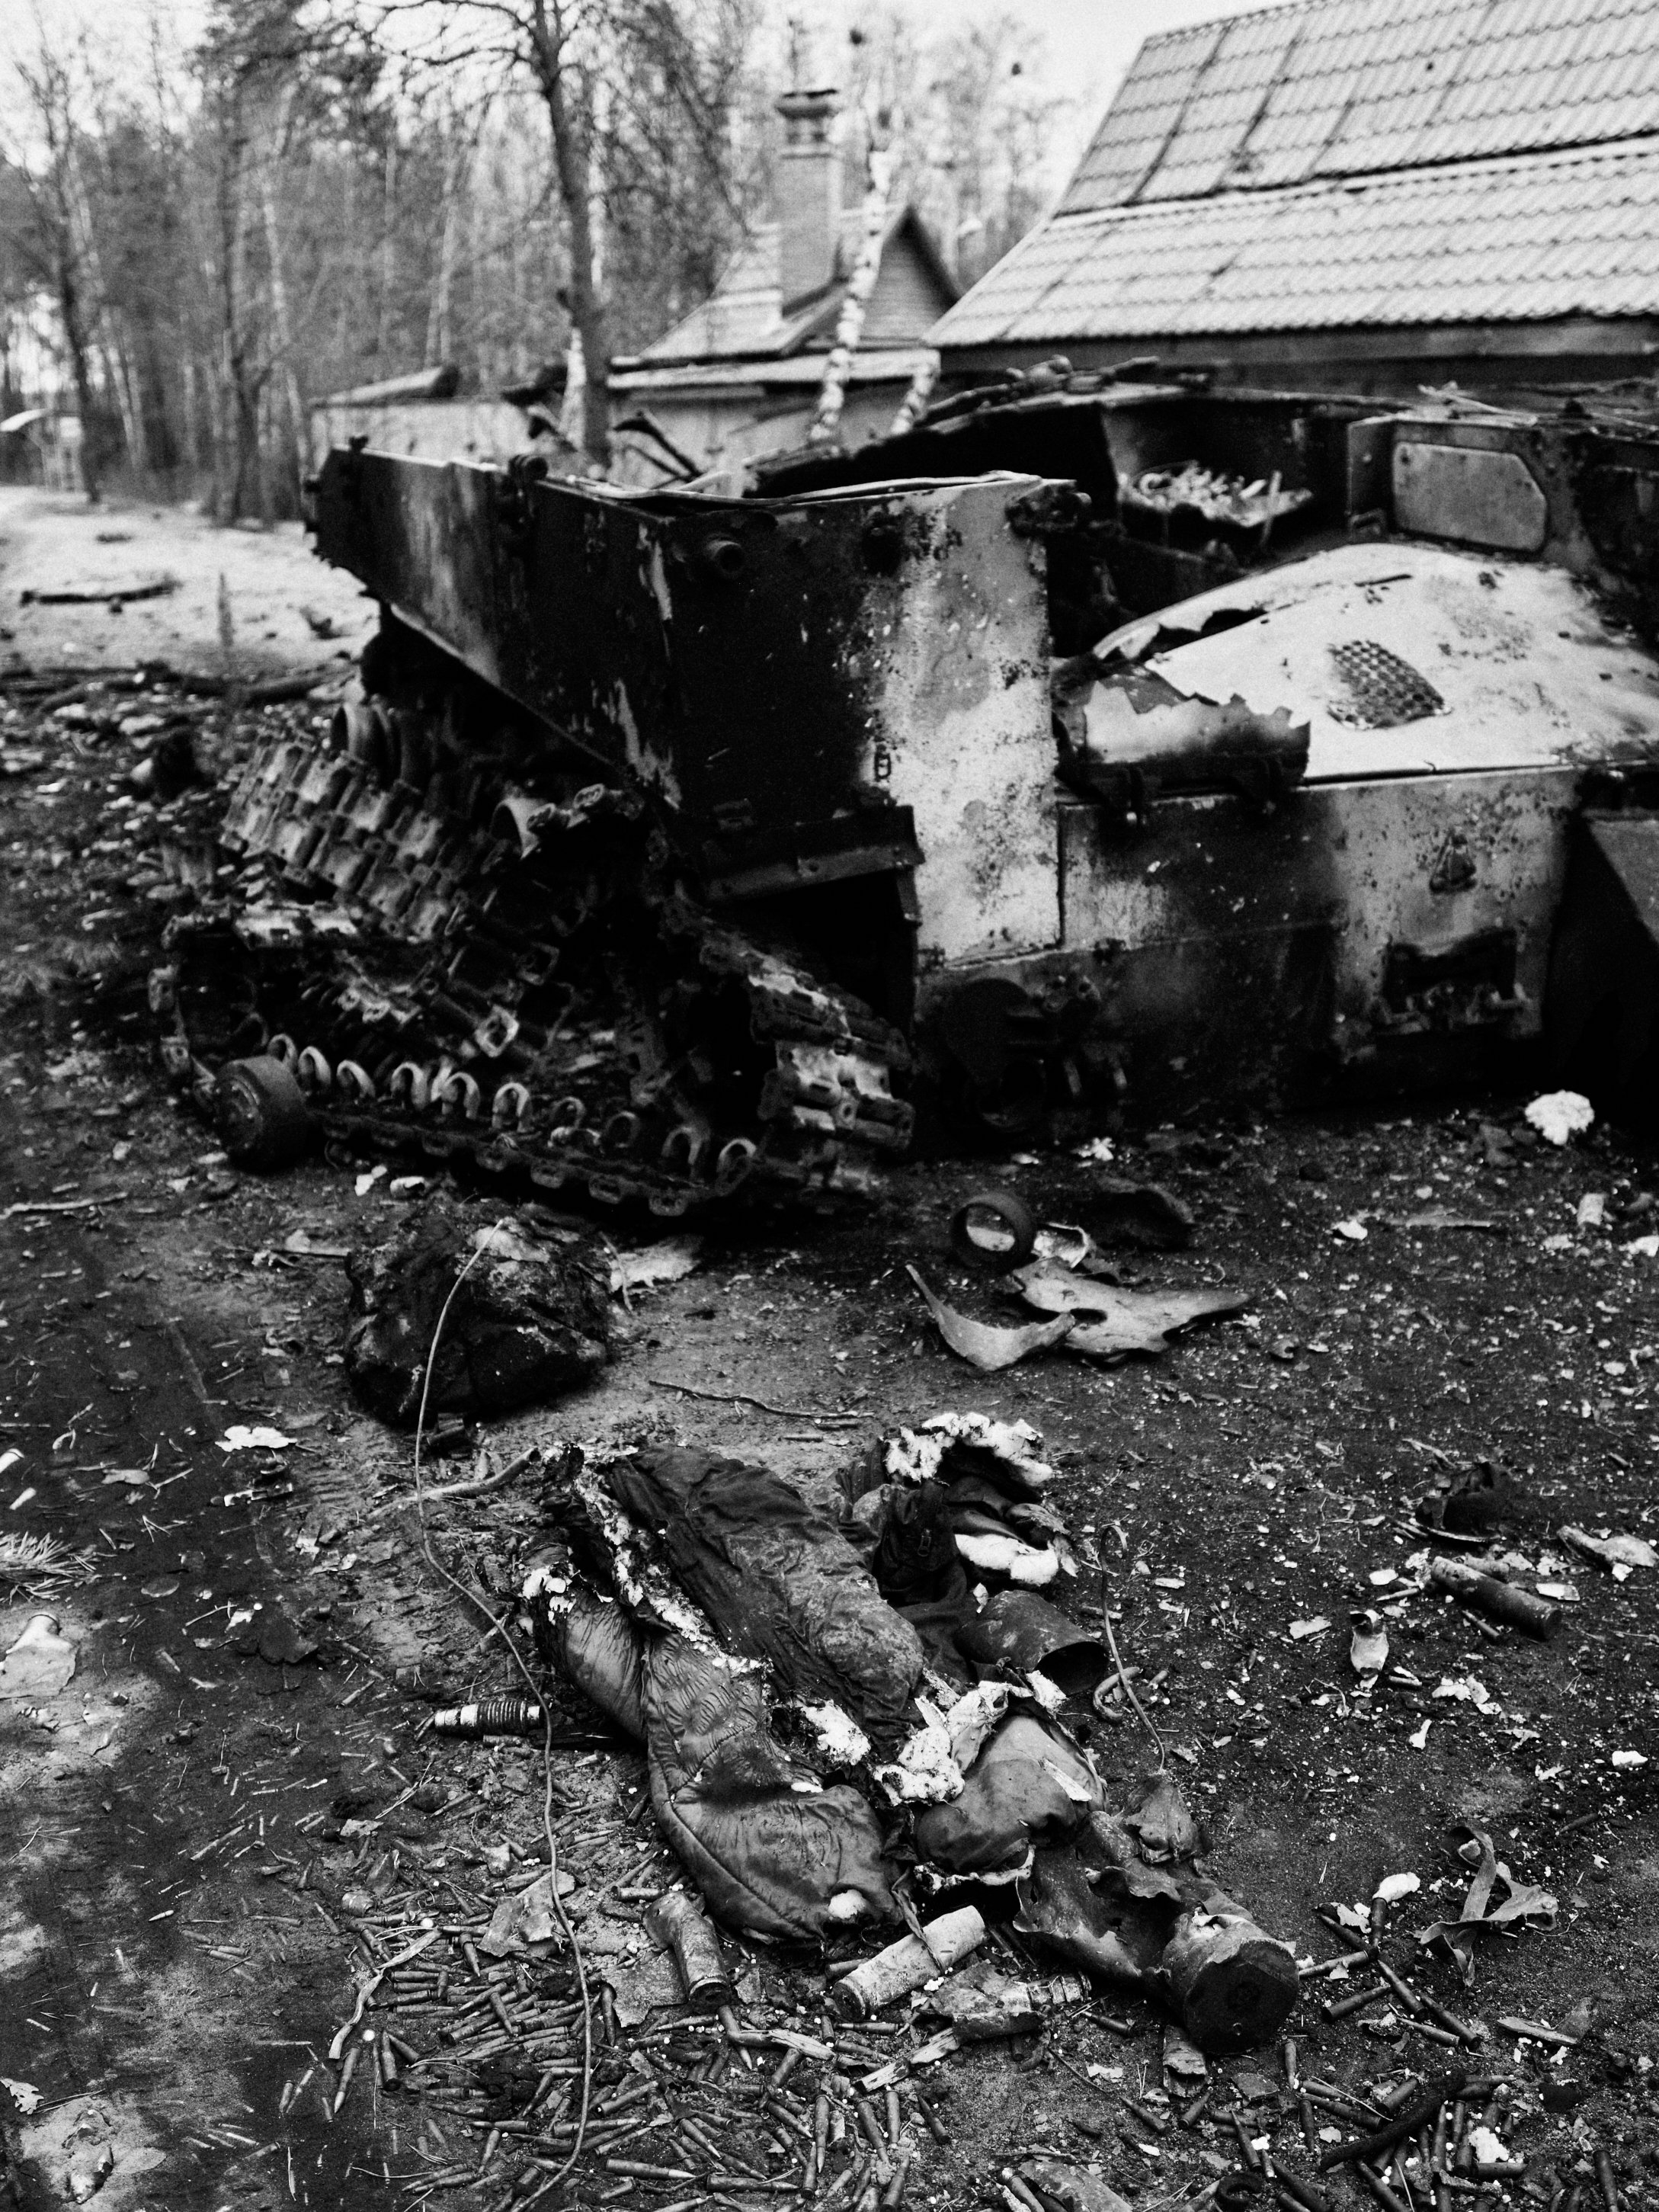 Remains of a Russian soldier and a burned vehicle in Irpin, Kyiv Oblast